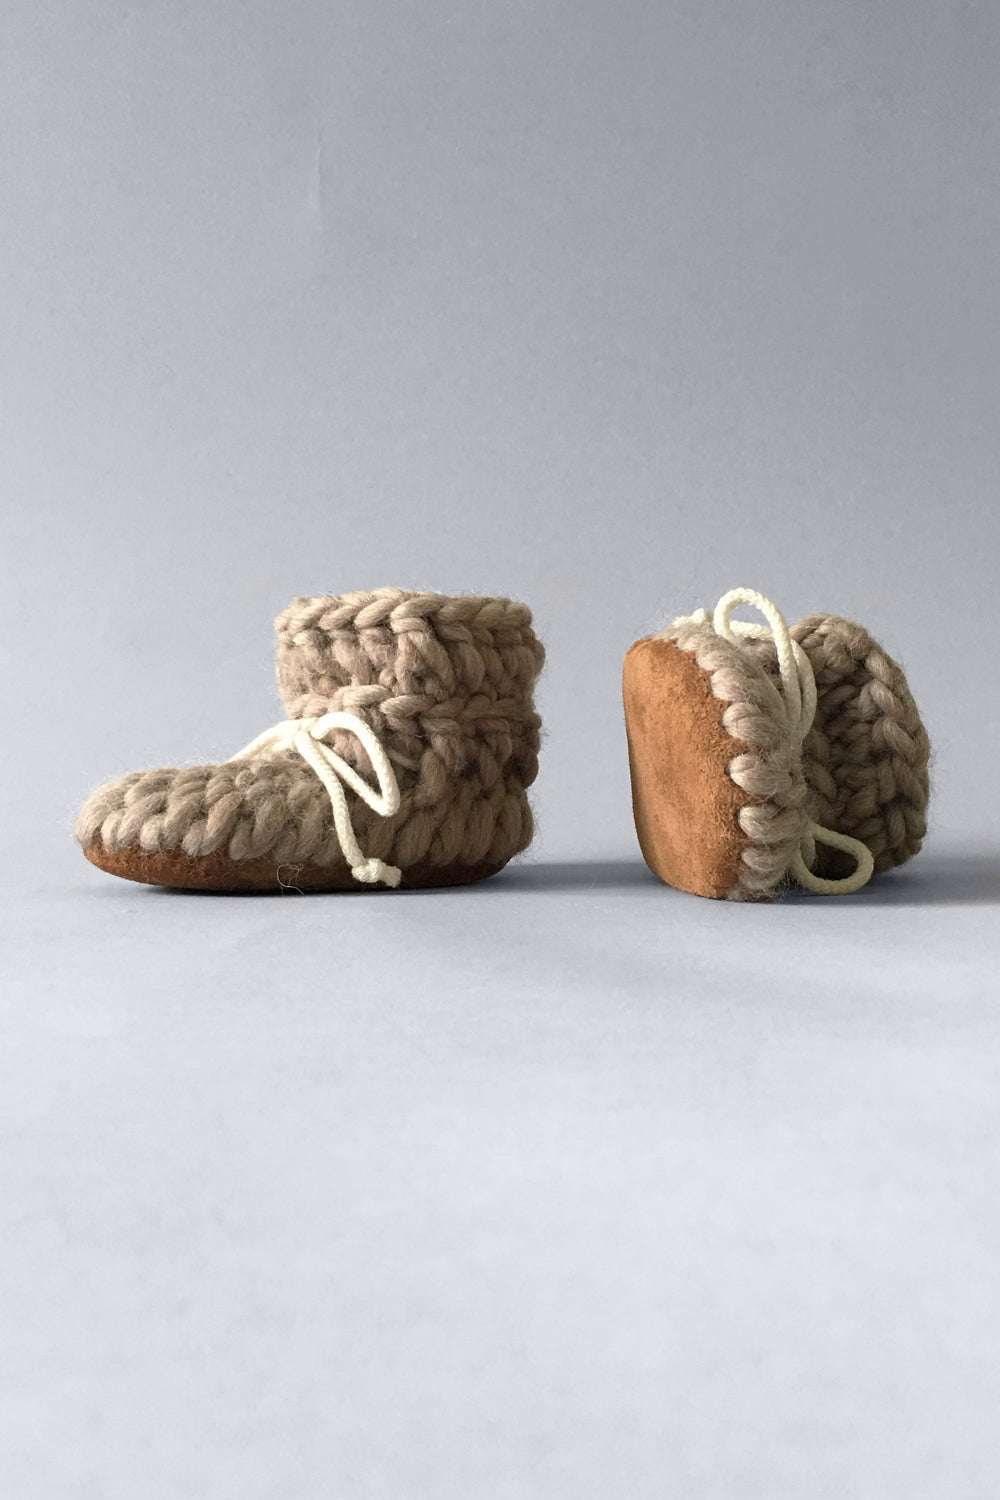 Shoes Made From Merino Wool Store | bellvalefarms.com